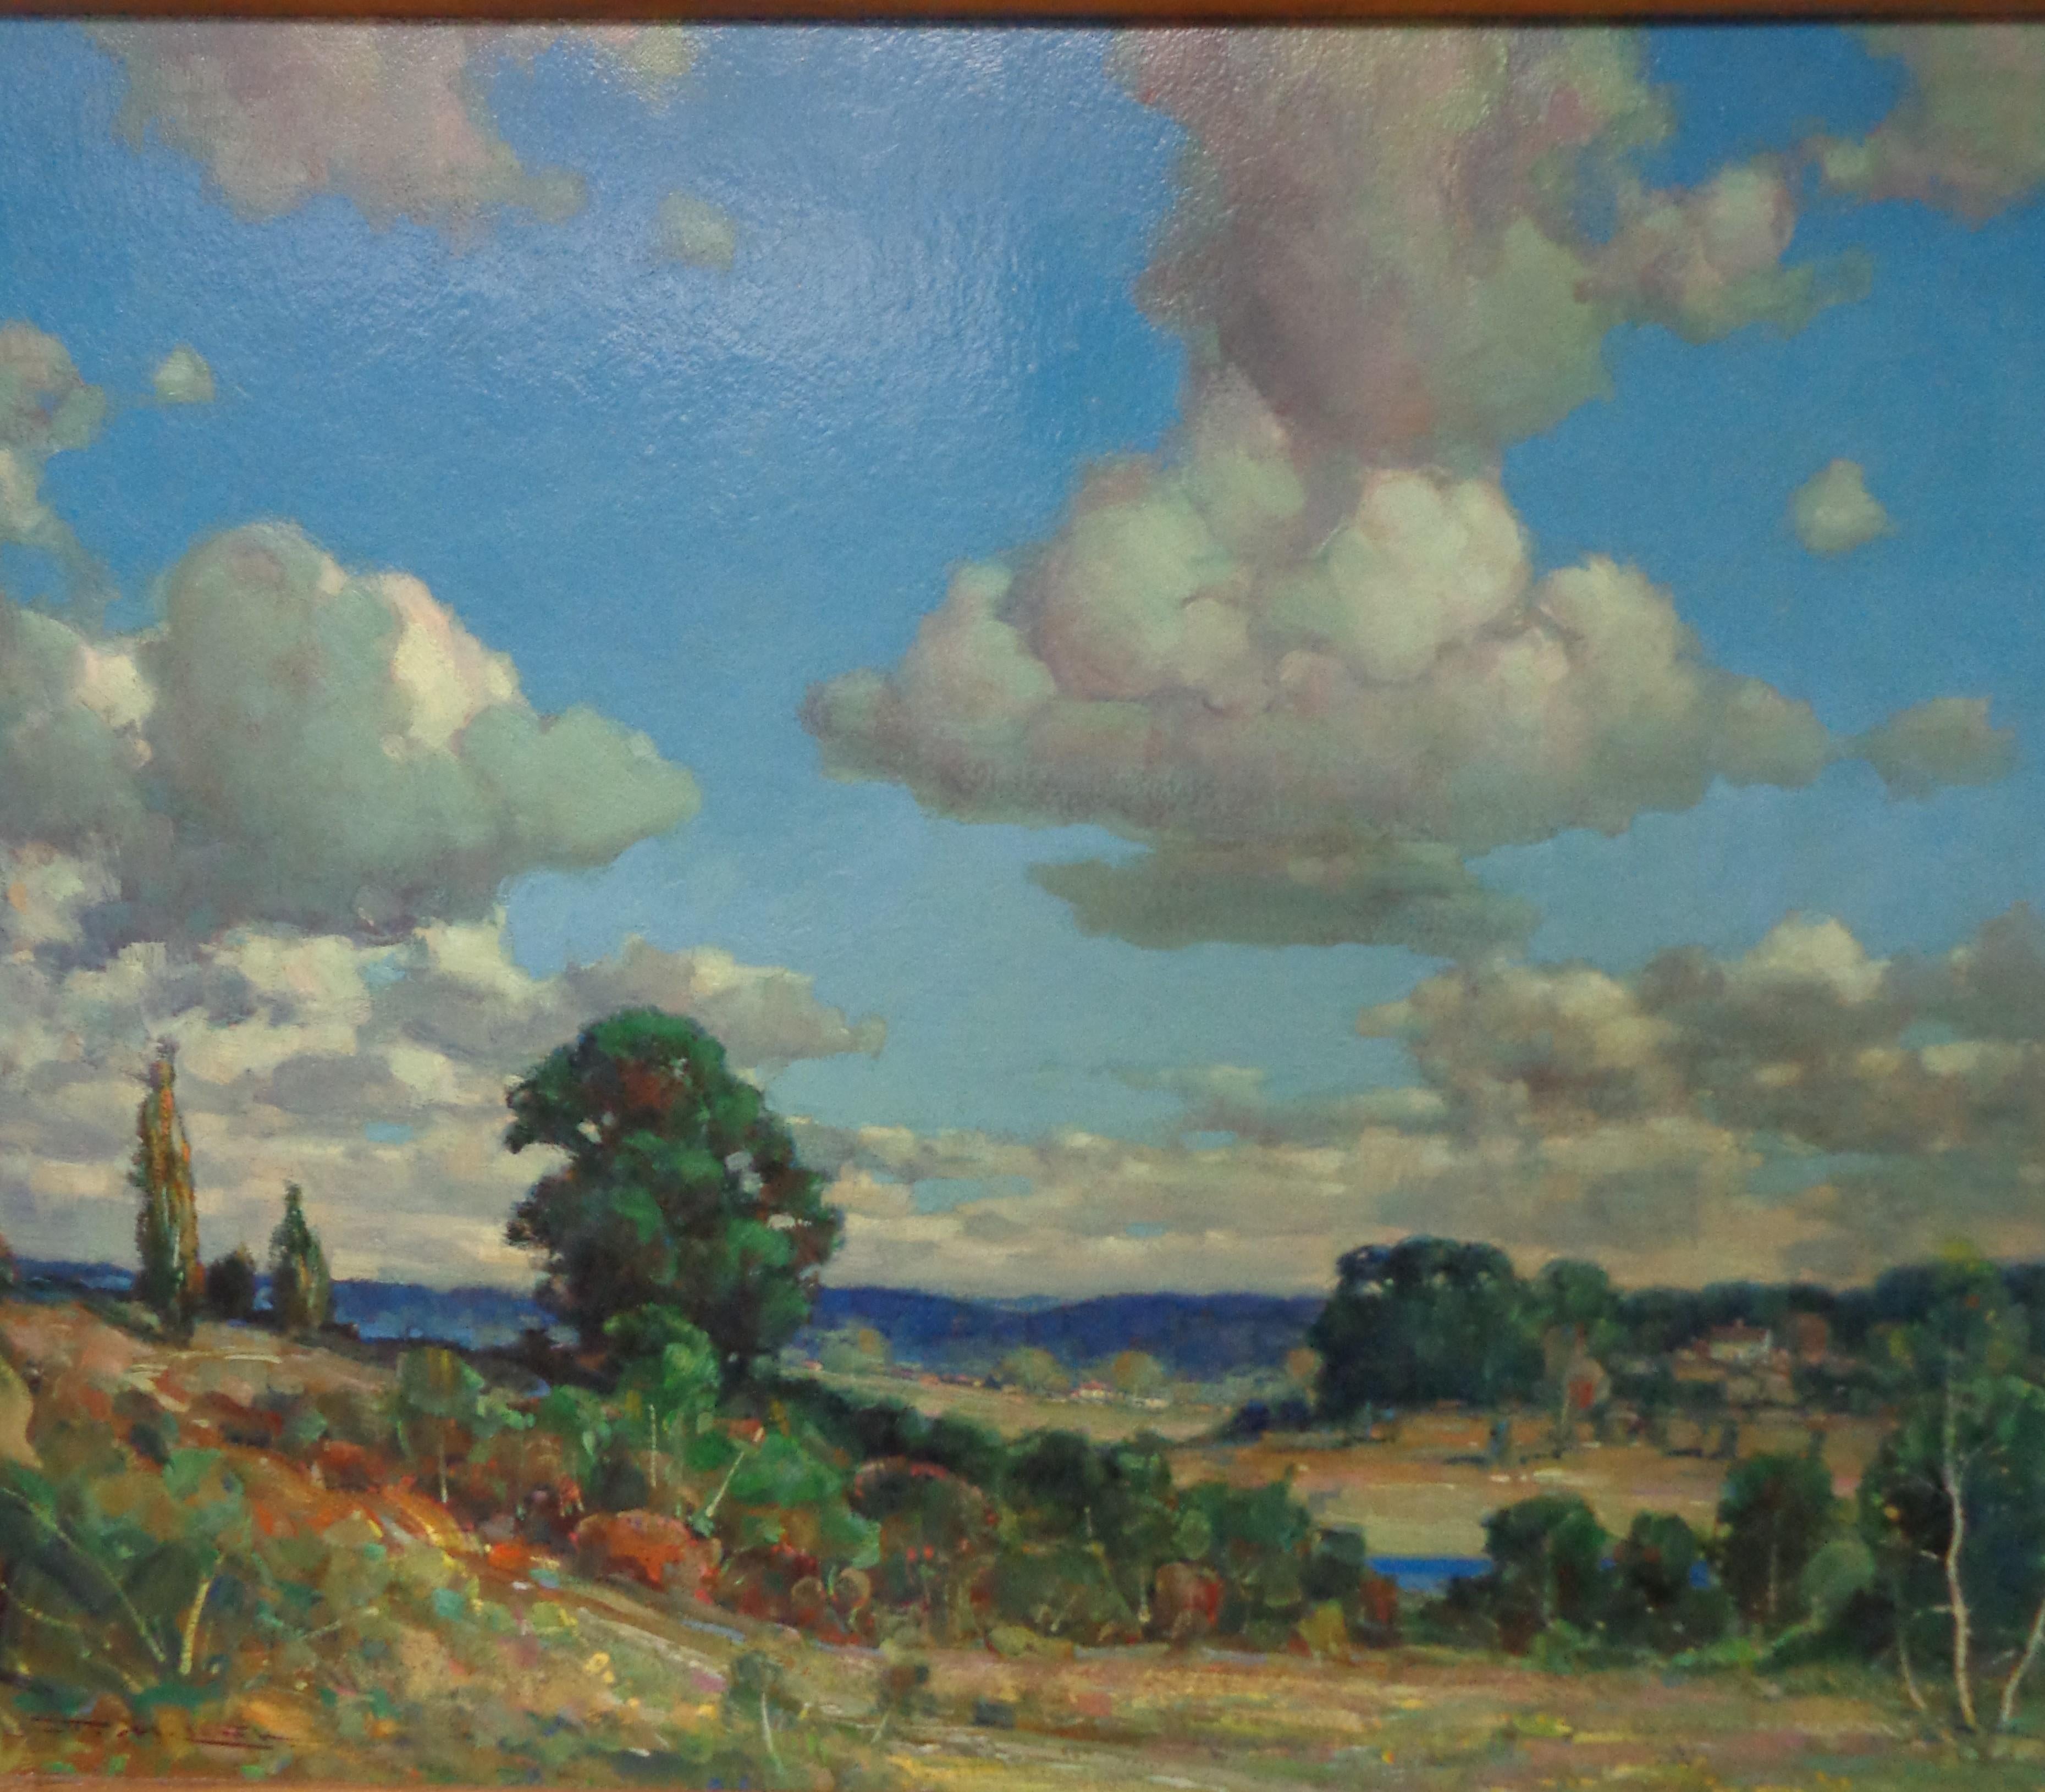 Landscape Oil Painting on Panel by Frederick M Lamb of Sky & Clouds 1